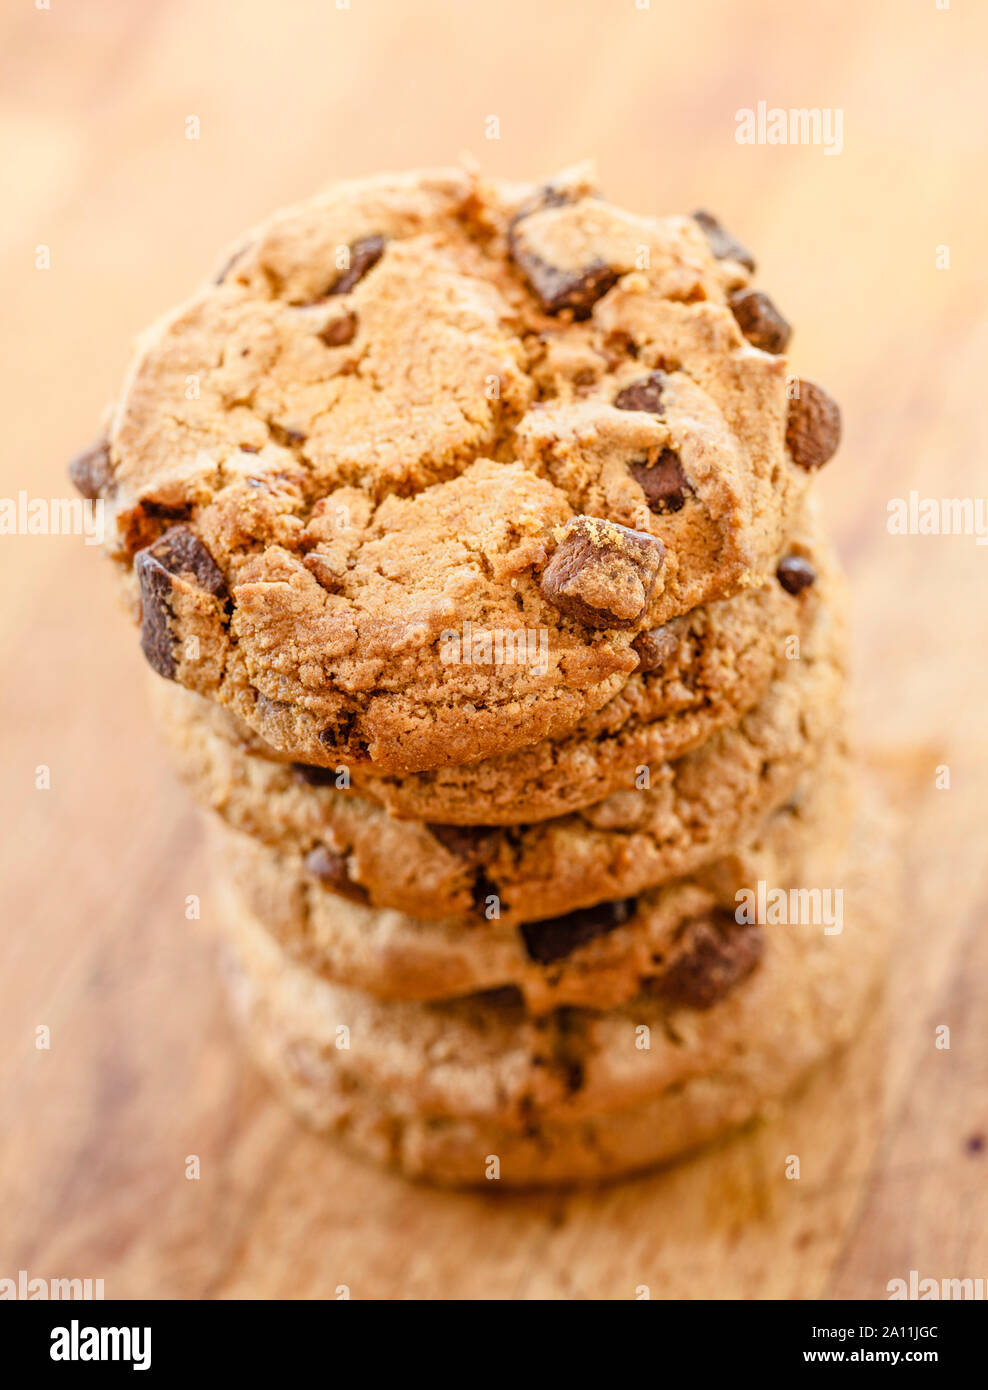 Chocolate chip cookies stack Stock Photo